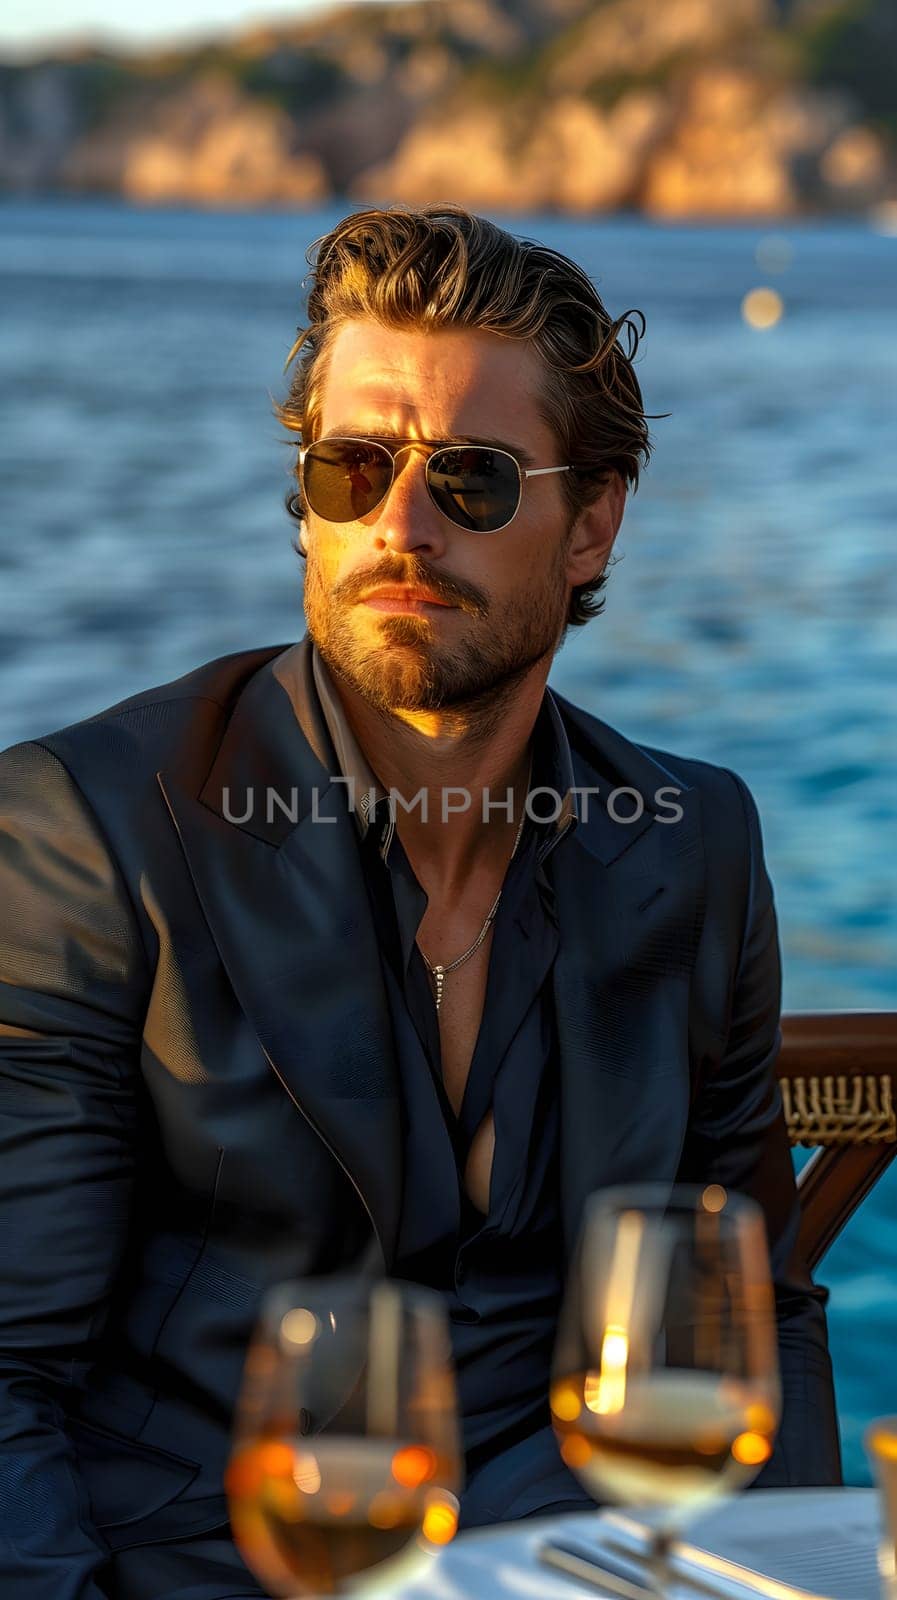 A man in sunglasses sits at a table with two glasses of wine by Nadtochiy